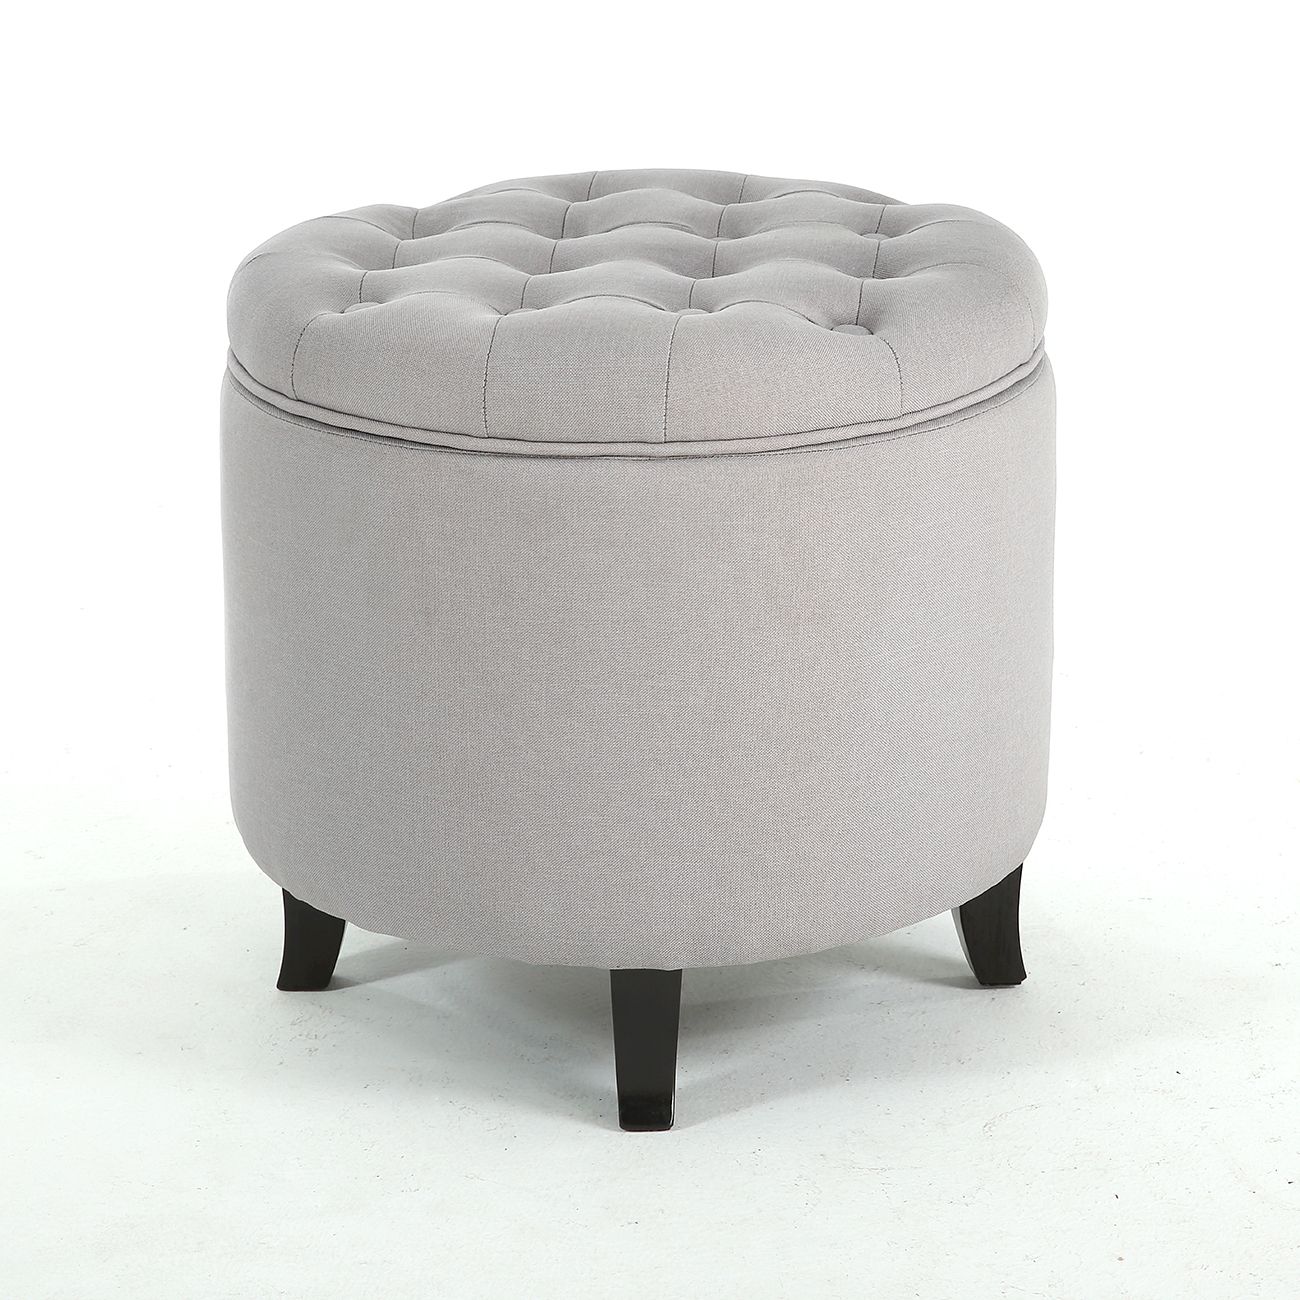 Favorite Classic Storage Ottoman Seat Nailhead Trim Large Round Tufted Table Pertaining To Round Gray Faux Leather Ottomans With Pull Tab (View 9 of 10)